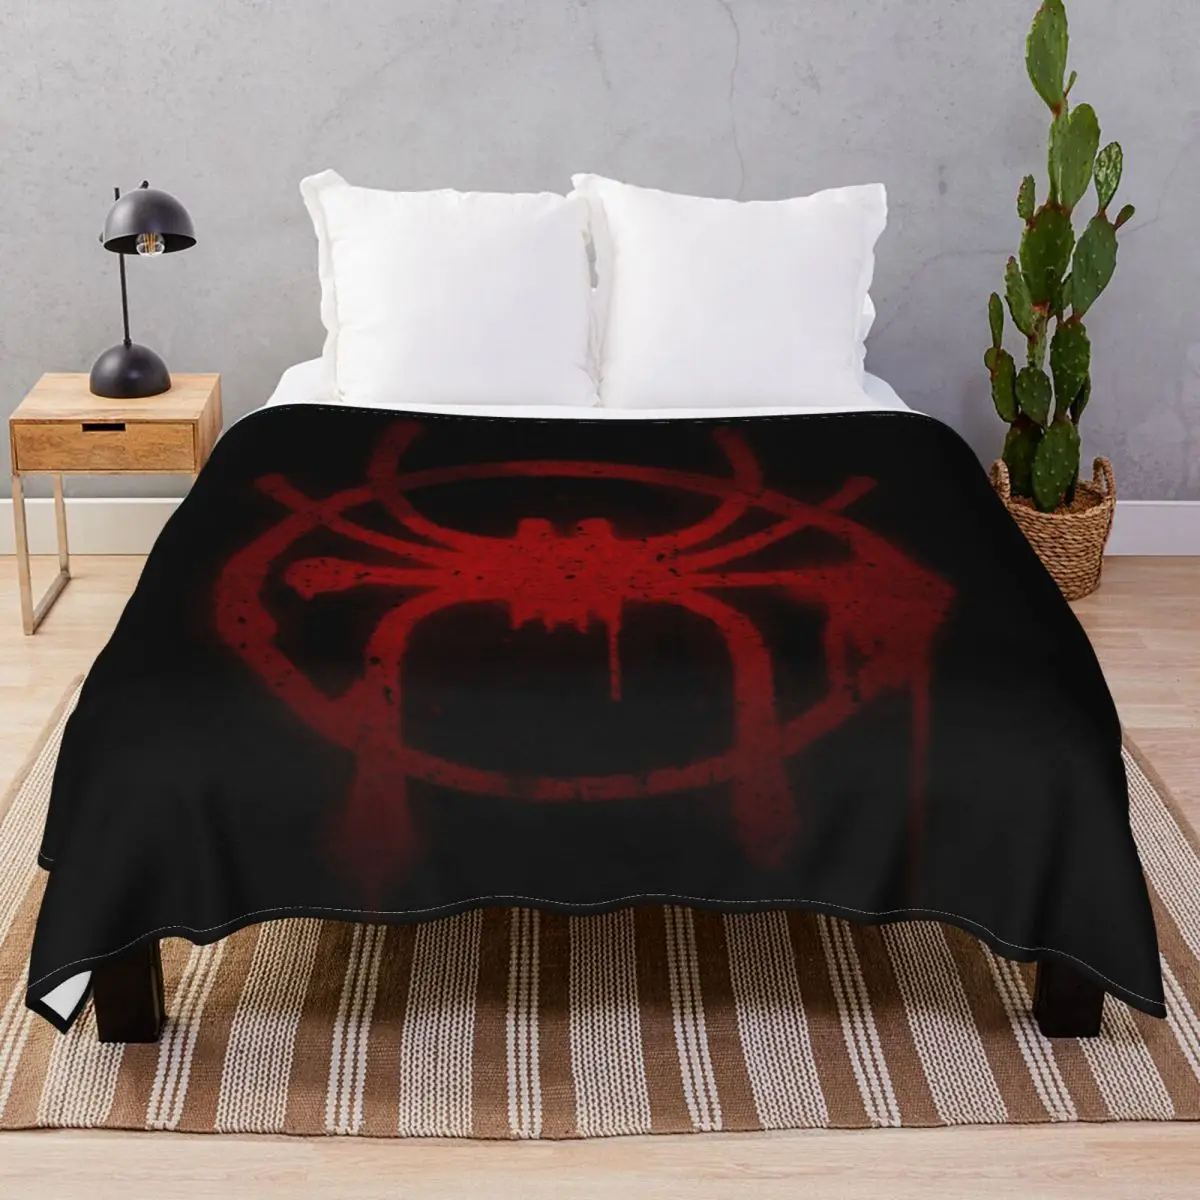 Miles Morales Spider Symbol Blanket Fleece Plush Print Lightweight Throw Blankets for Bed Home Couch Travel Cinema